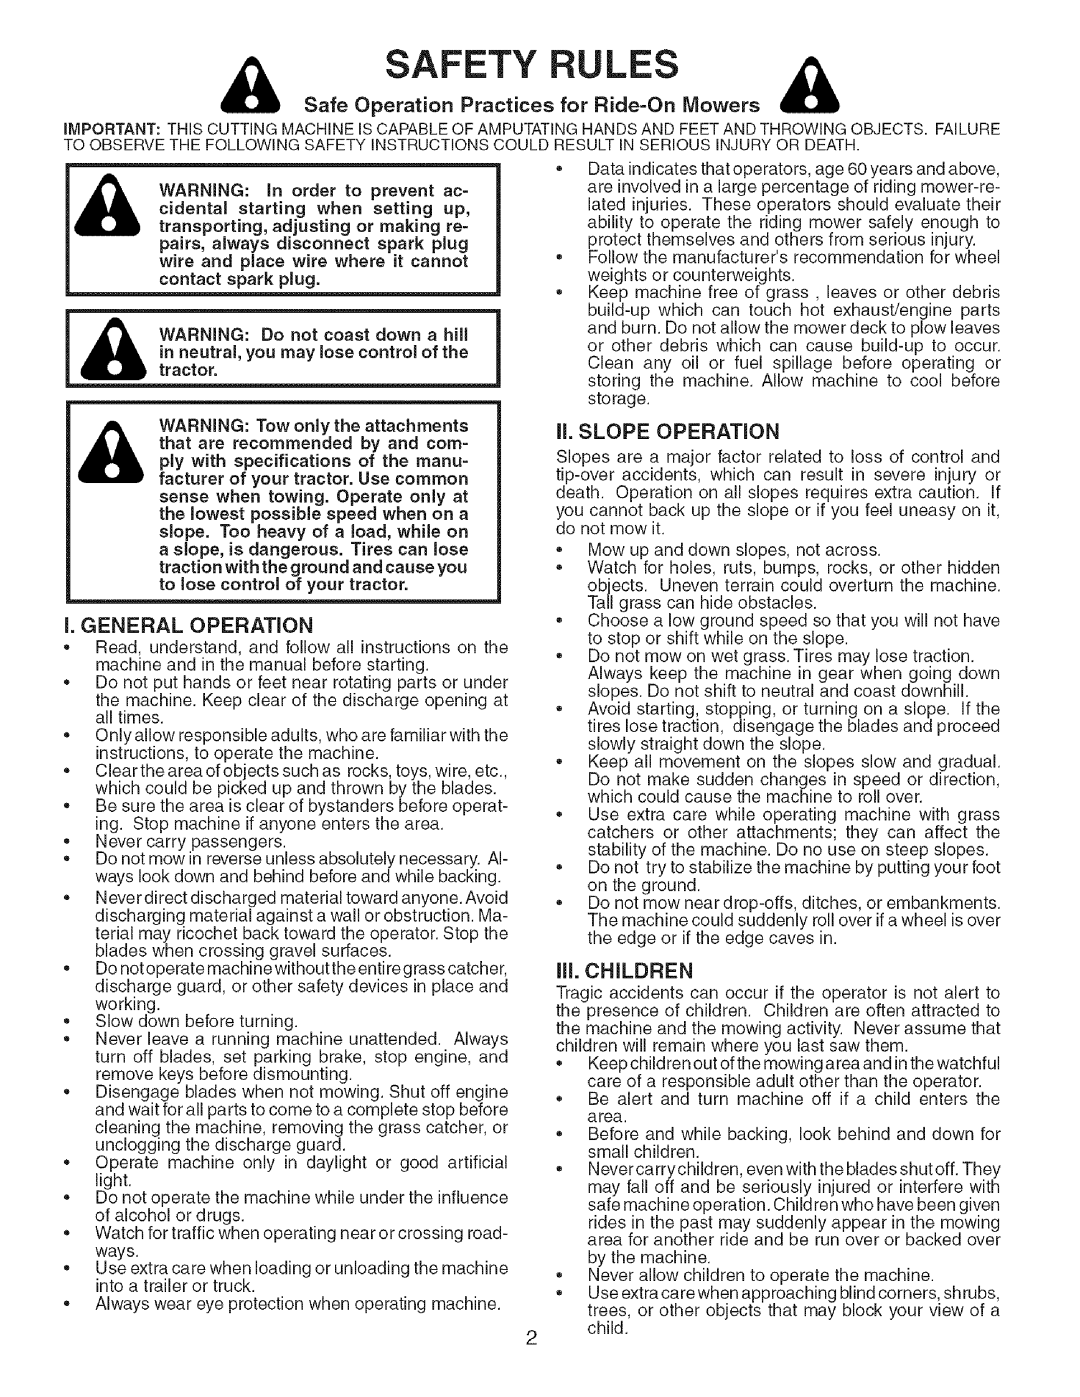 Craftsman 917.24898 Safety Rules, Safe Operation Practices for Ride-On Mowers, I. General Operation, Ii. Slope Operation 